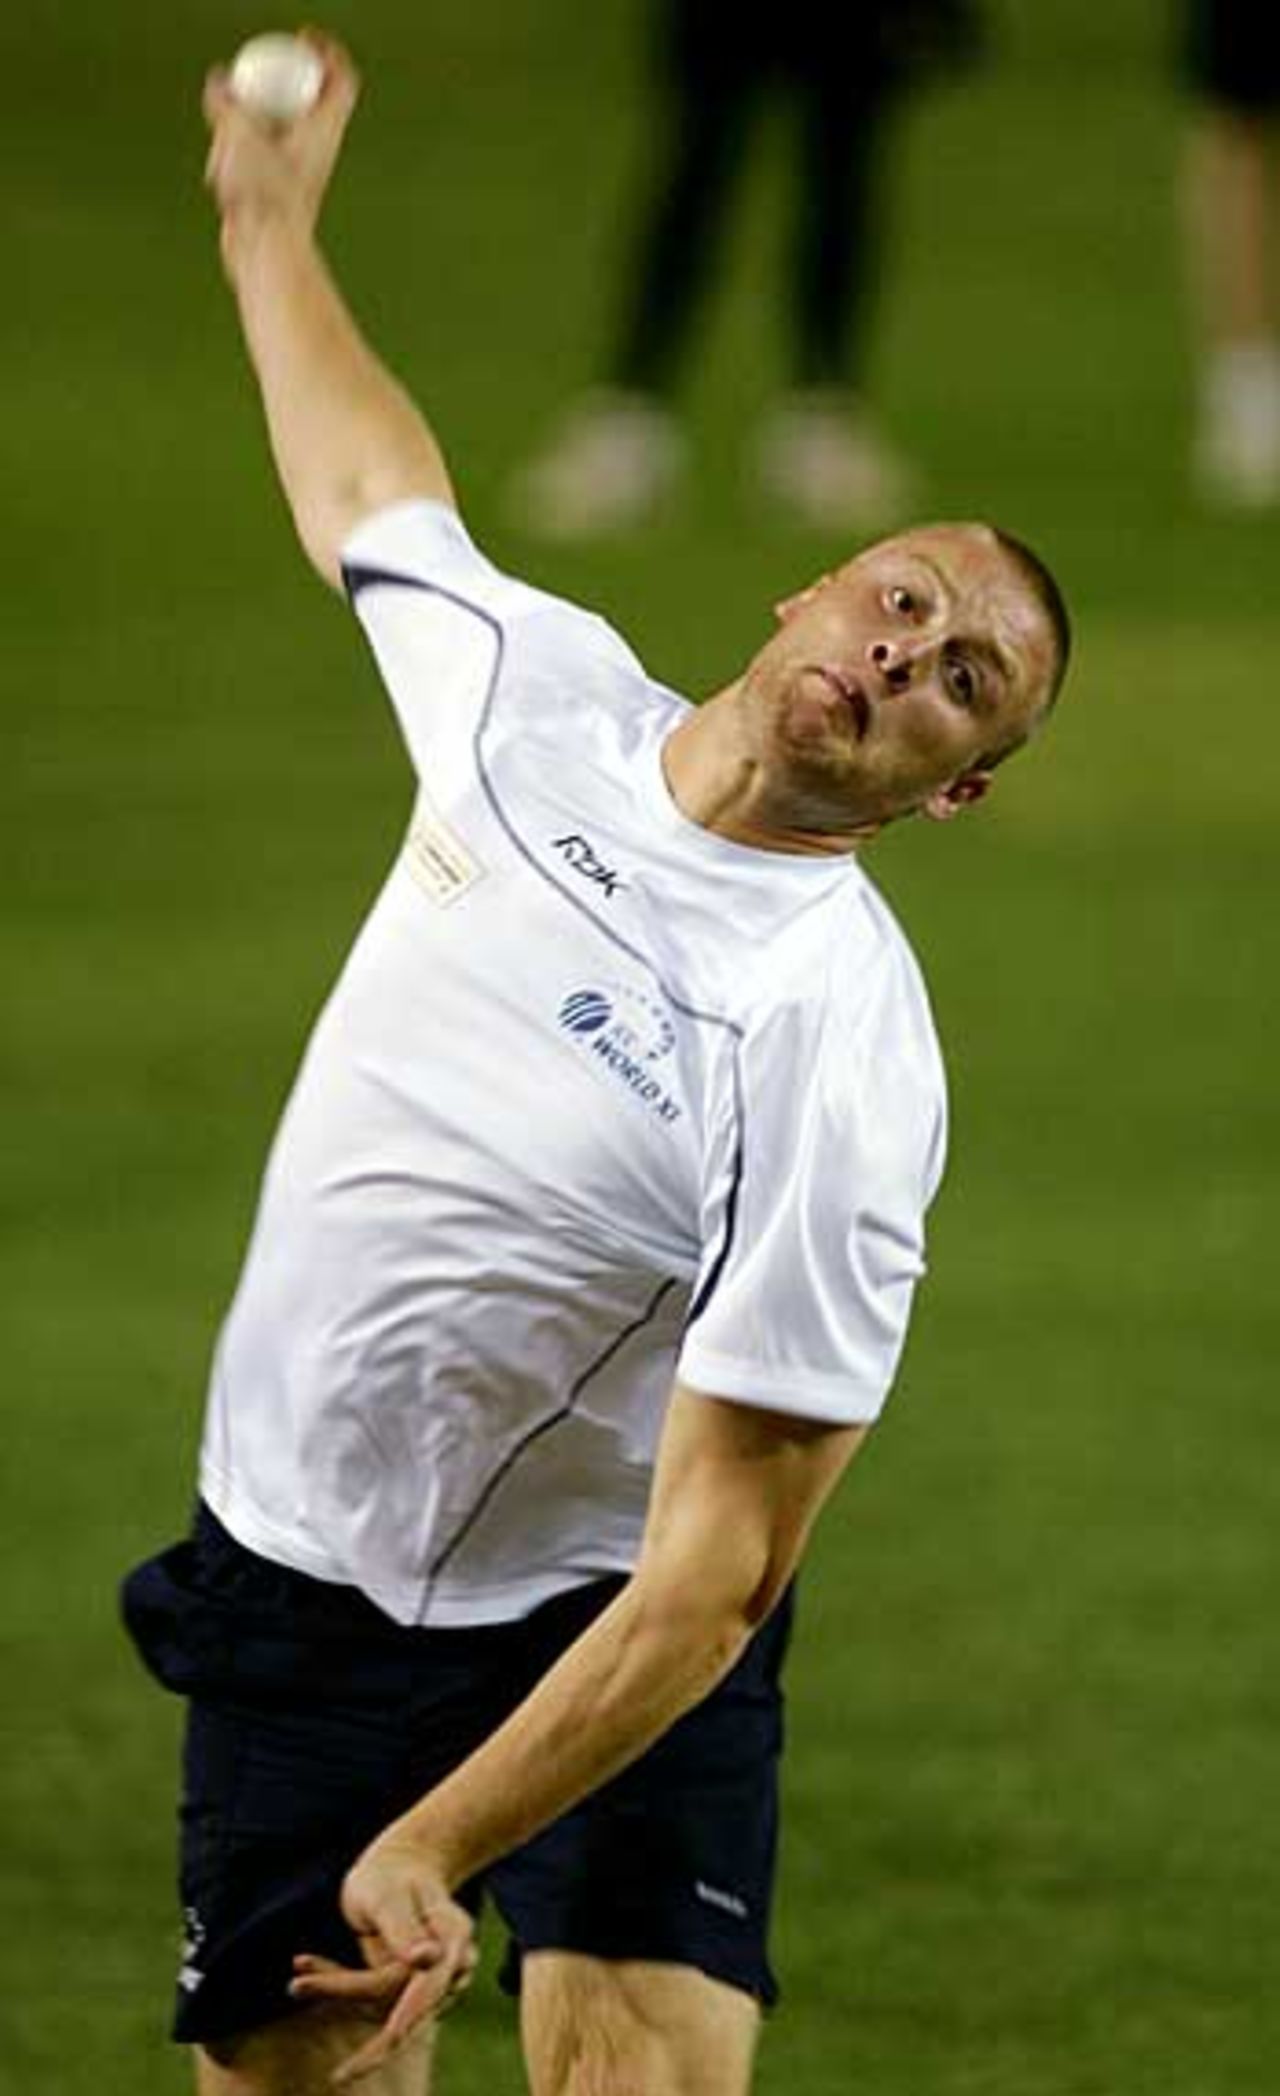 Andrew Flintoff roars in to bowl during a training session ahead of the ICC Super Series Trophy, Melbourne, October 3, 2005